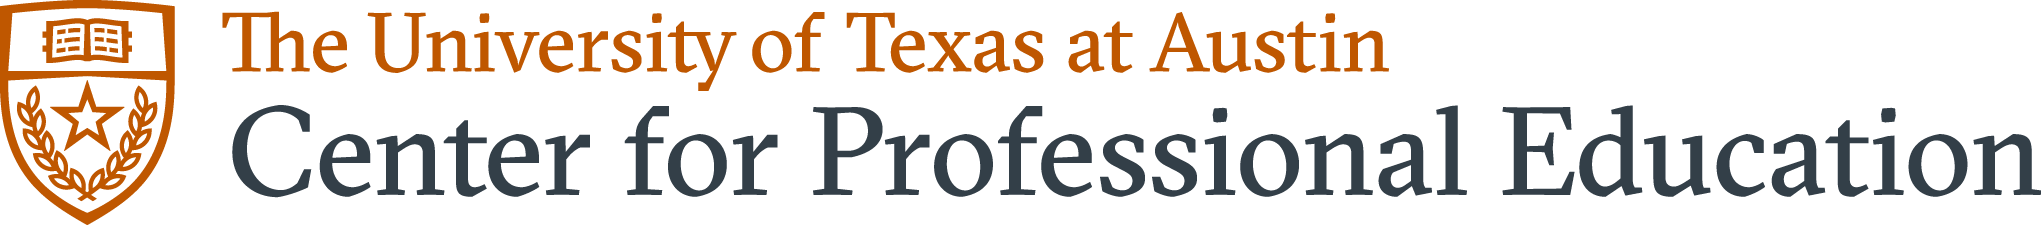 The University of Texas at Austin Center for Professional Education Logo